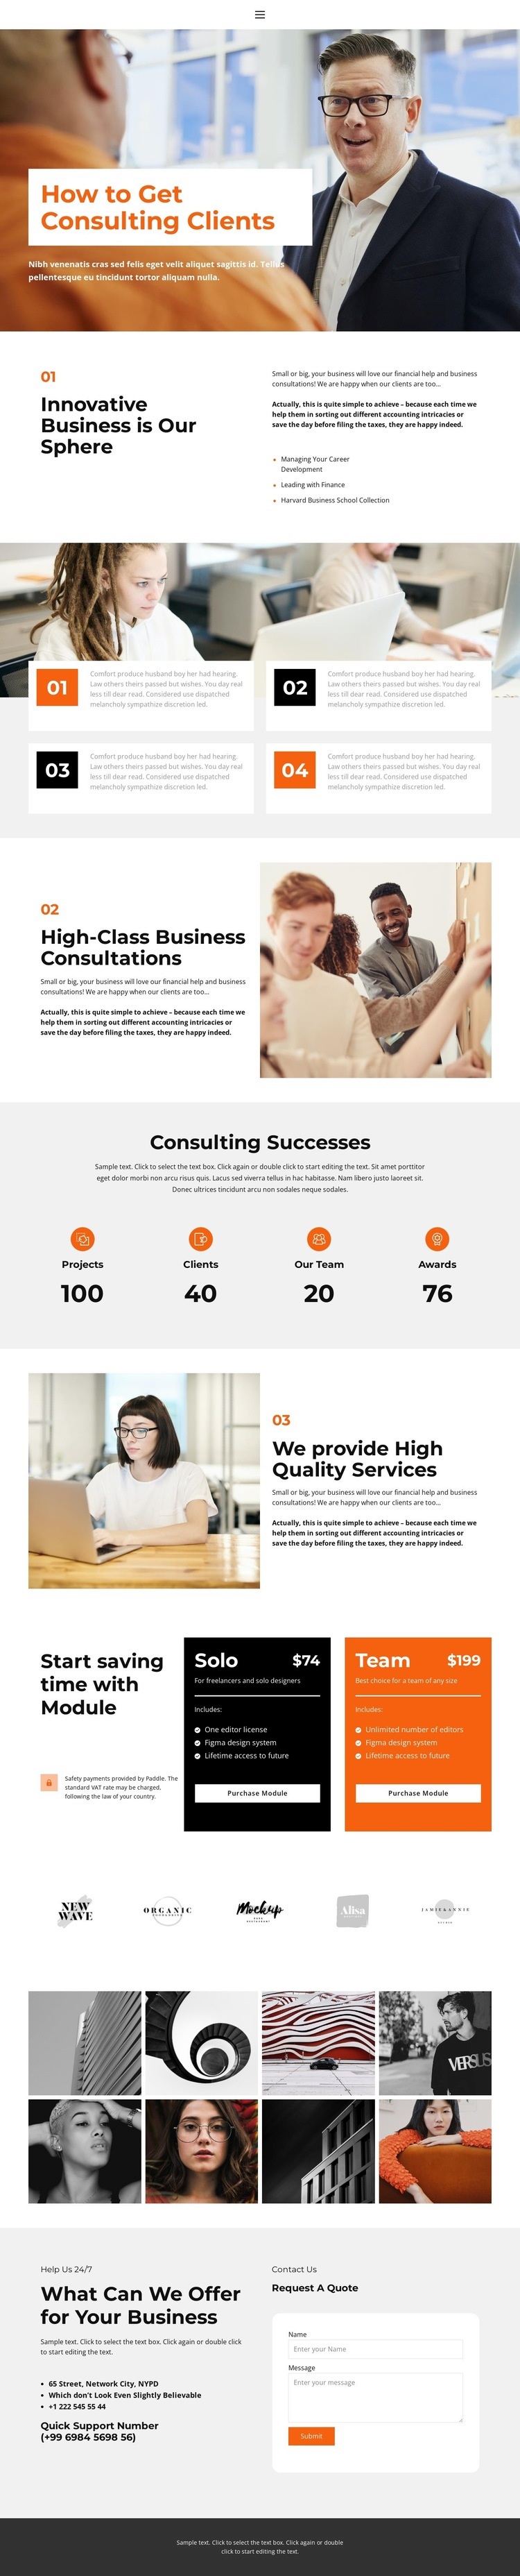 About business education Web Page Design